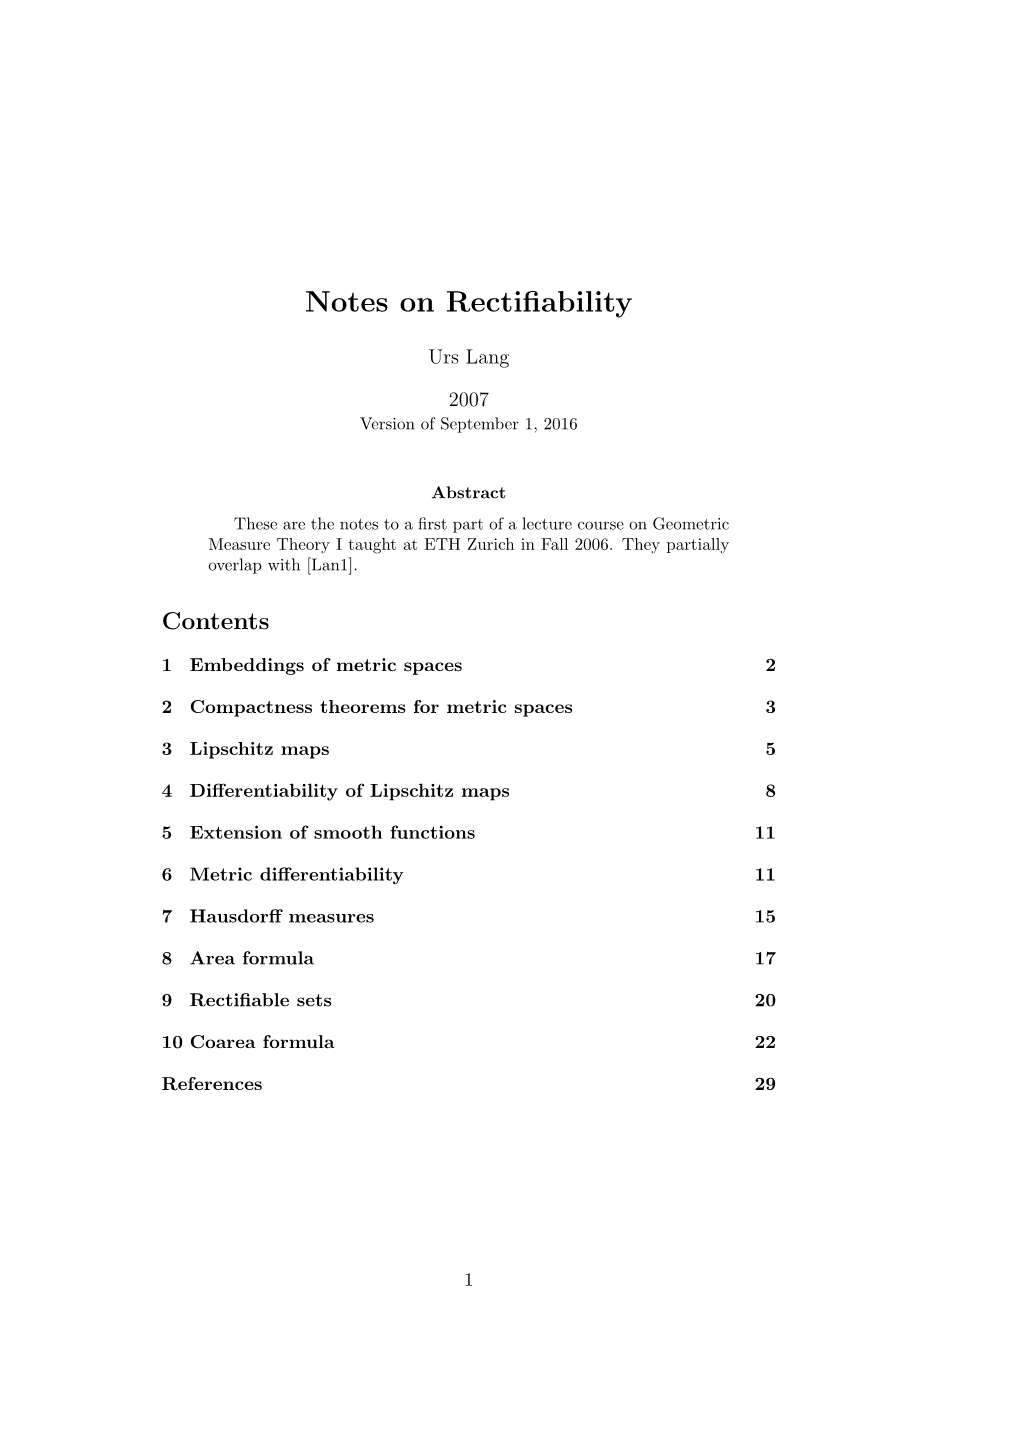 Notes on Rectifiability